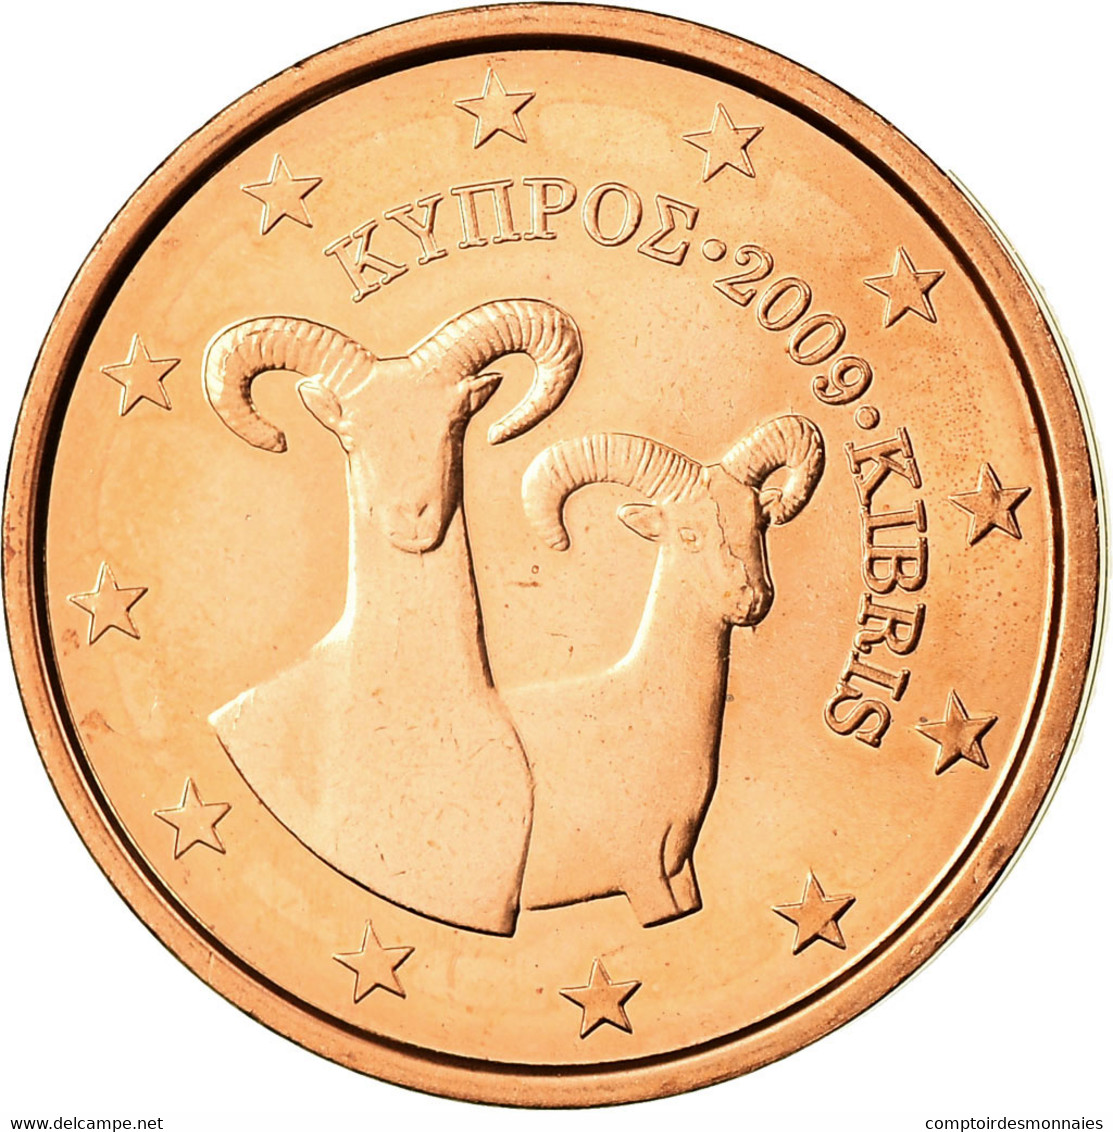 Chypre, 2 Euro Cent, 2008, FDC, Copper Plated Steel, KM:79 - Zypern